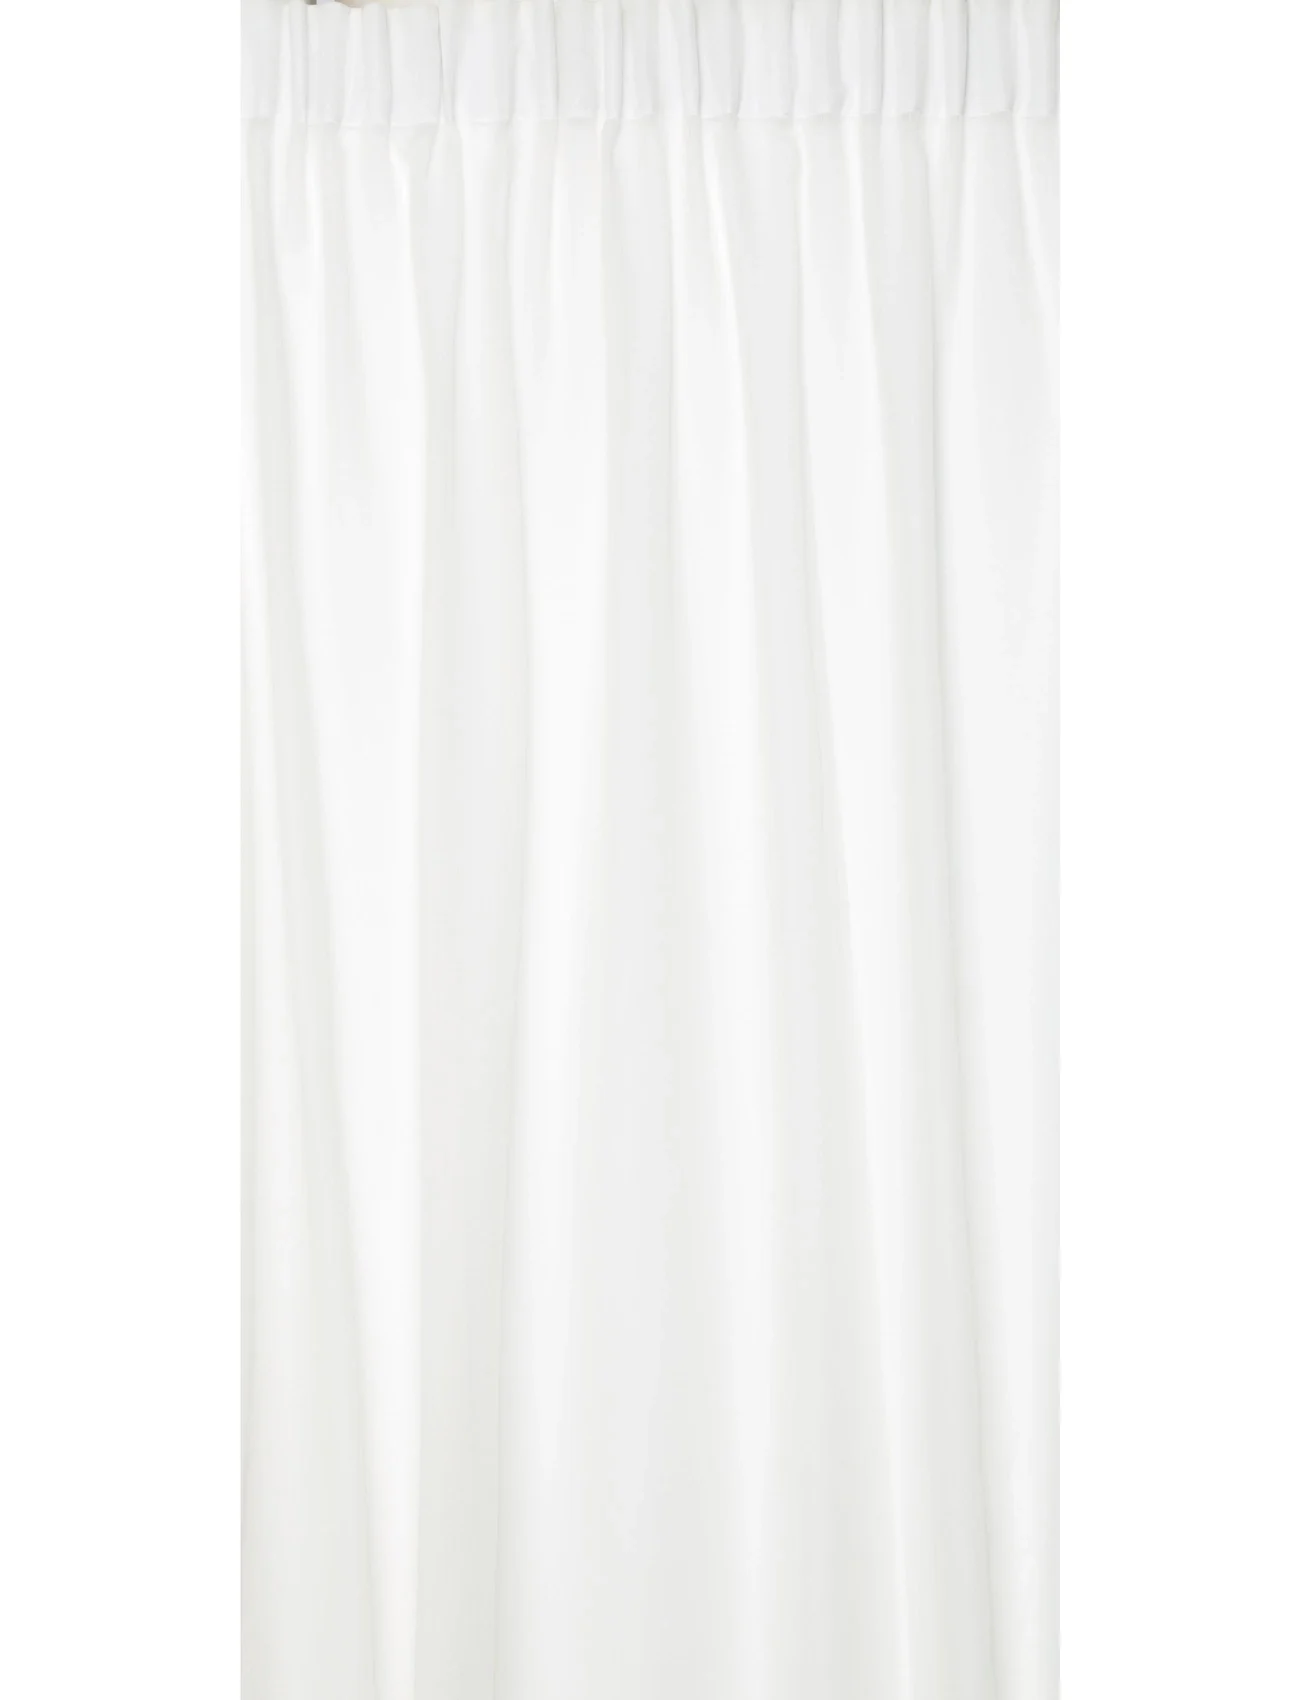 Mimou - Gardin Mimmi recycled - long curtains - natural white - 0